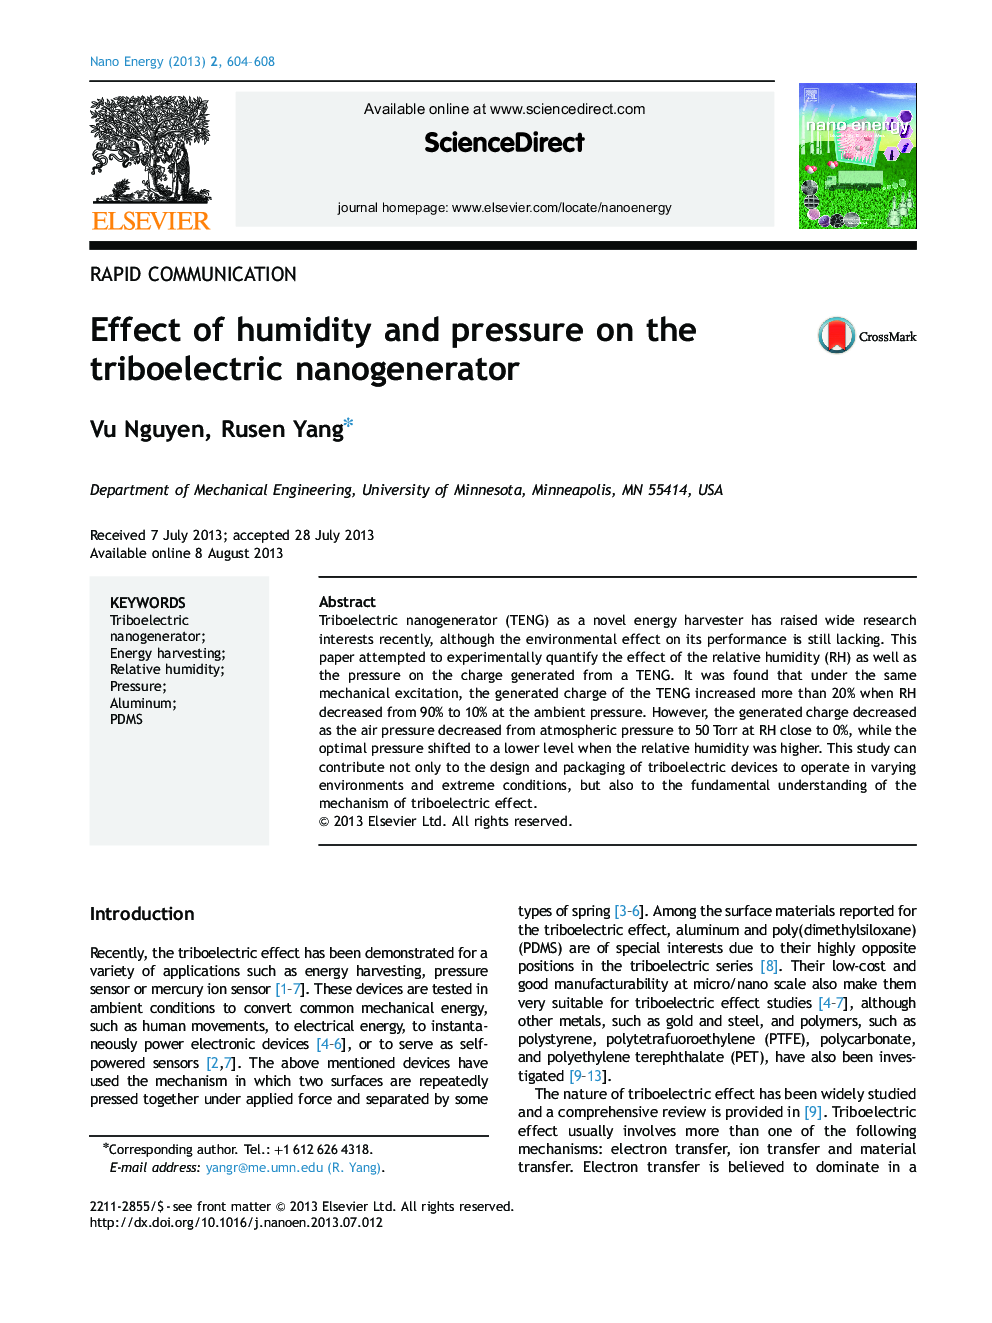 Effect of humidity and pressure on the triboelectric nanogenerator